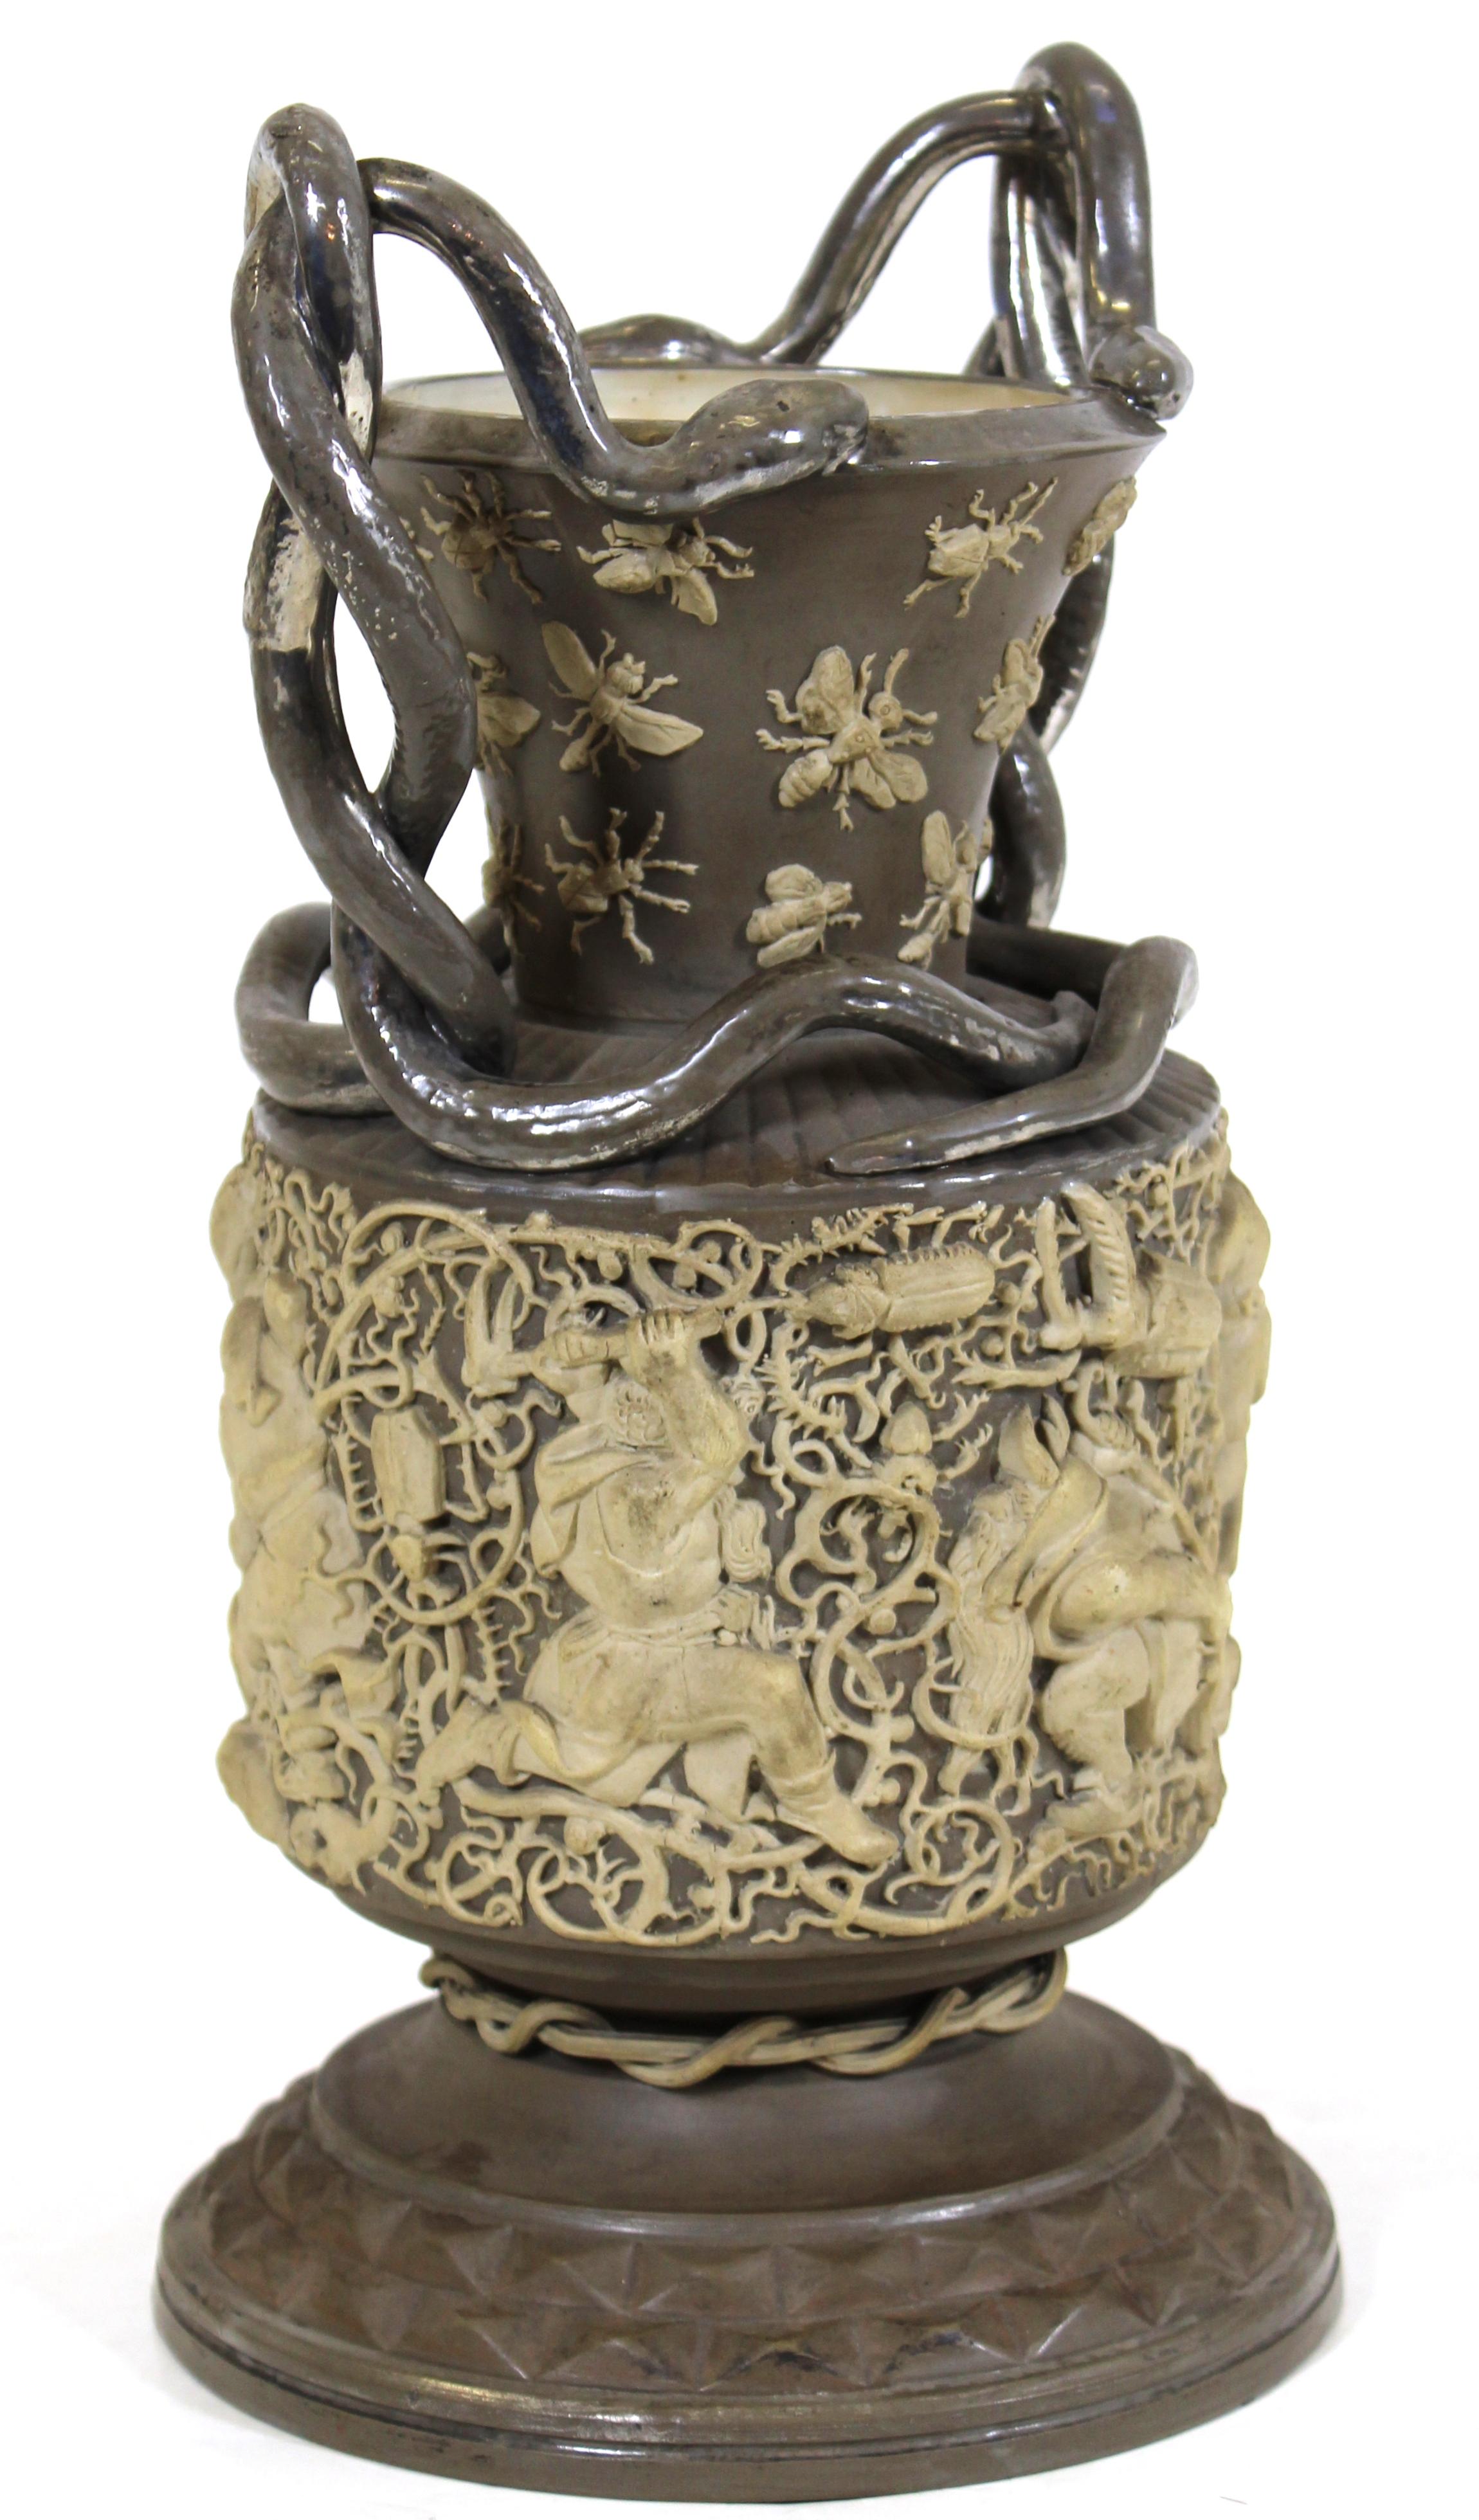 Aesthetic Movement German Aesthetic Style Exhibition Vase with Bugs, Bees and Snake Handles